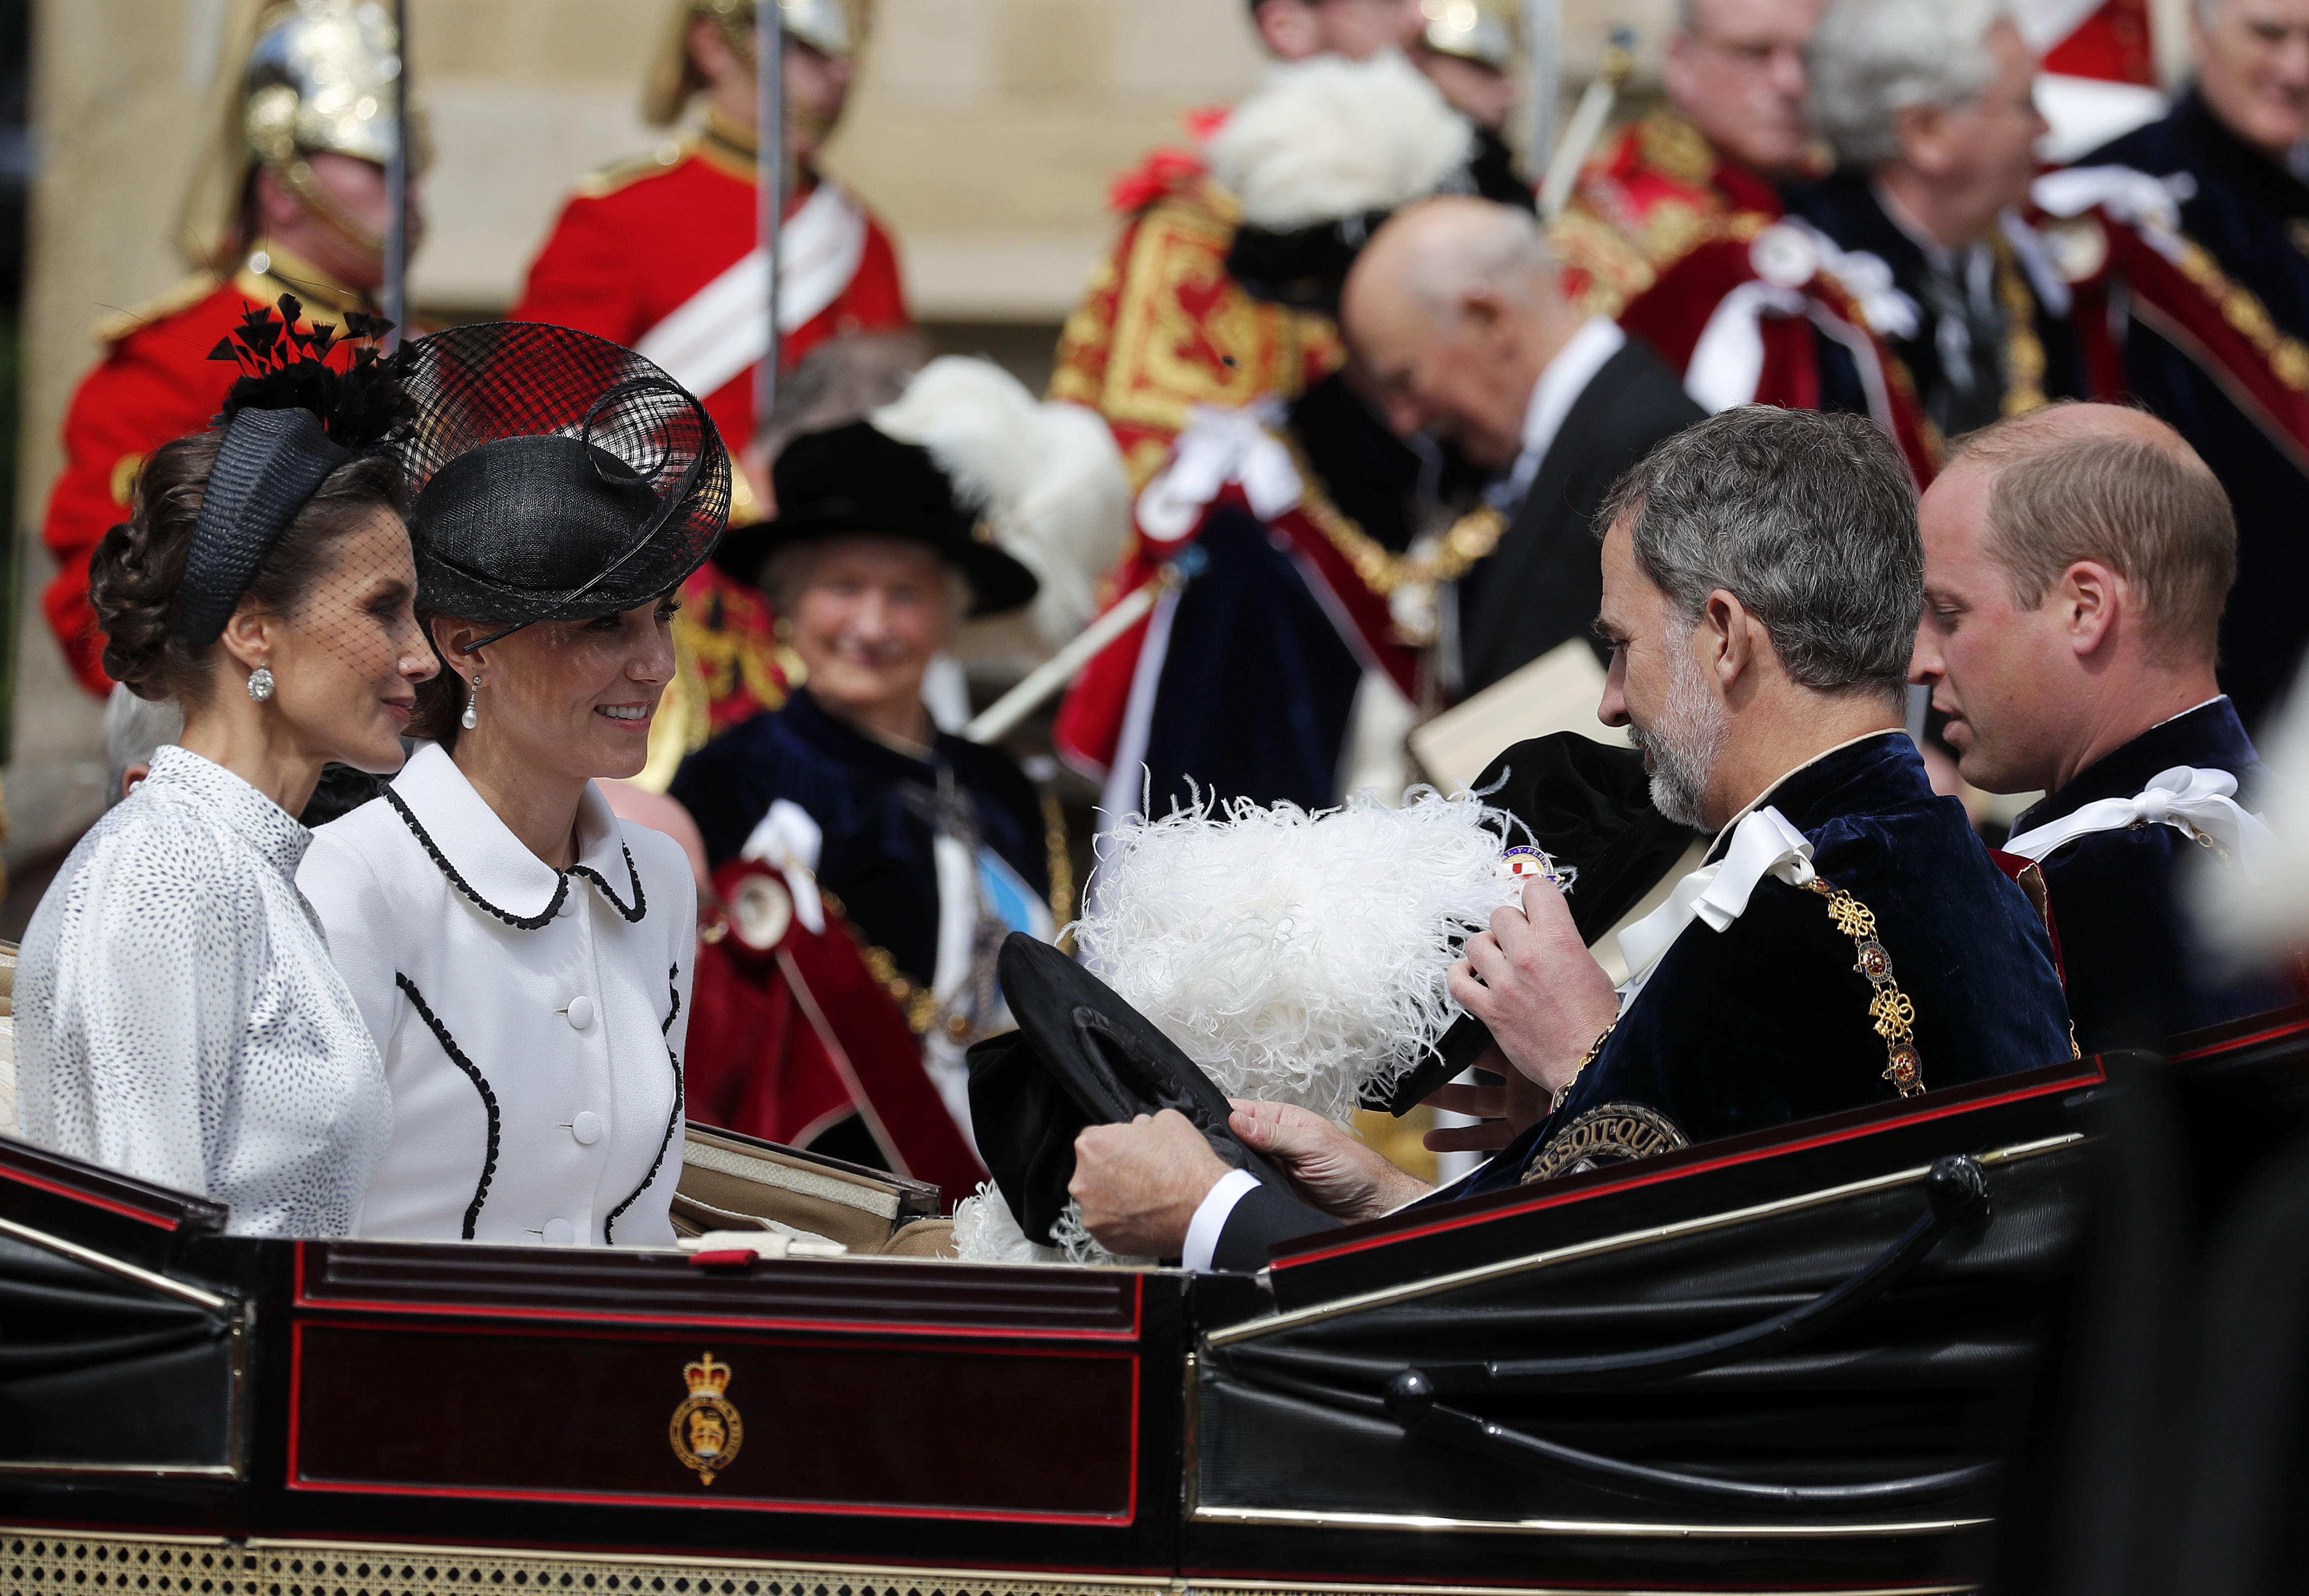 Queen Letizia of Spain, Catherine, Duchess of Cambridge, Prince William, Duke of Cambridge and King Felipe of Spain leave the Order of the Garter Service on June 17, 2019 in Windsor, England. The Order of the Garter is the senior and oldest British Order of Chivalry, founded by Edward III in 1348. The Garter ceremonial dates from 1948, when formal installation was revived by King George VI for the first time since 1805. (Photo by Frank Augstein - WPA Pool/Getty Images)